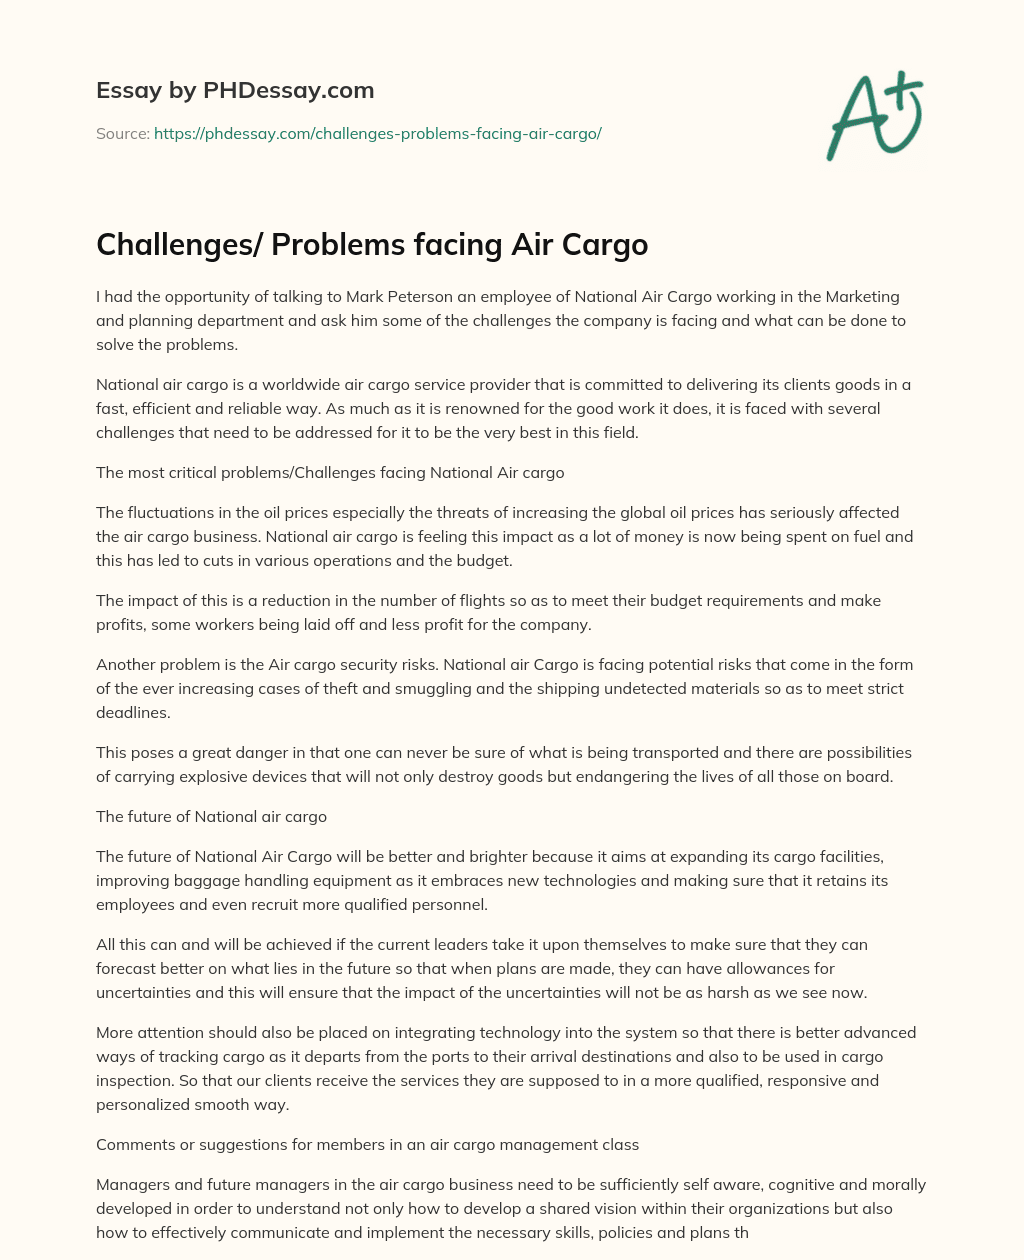 Challenges/ Problems facing Air Cargo essay